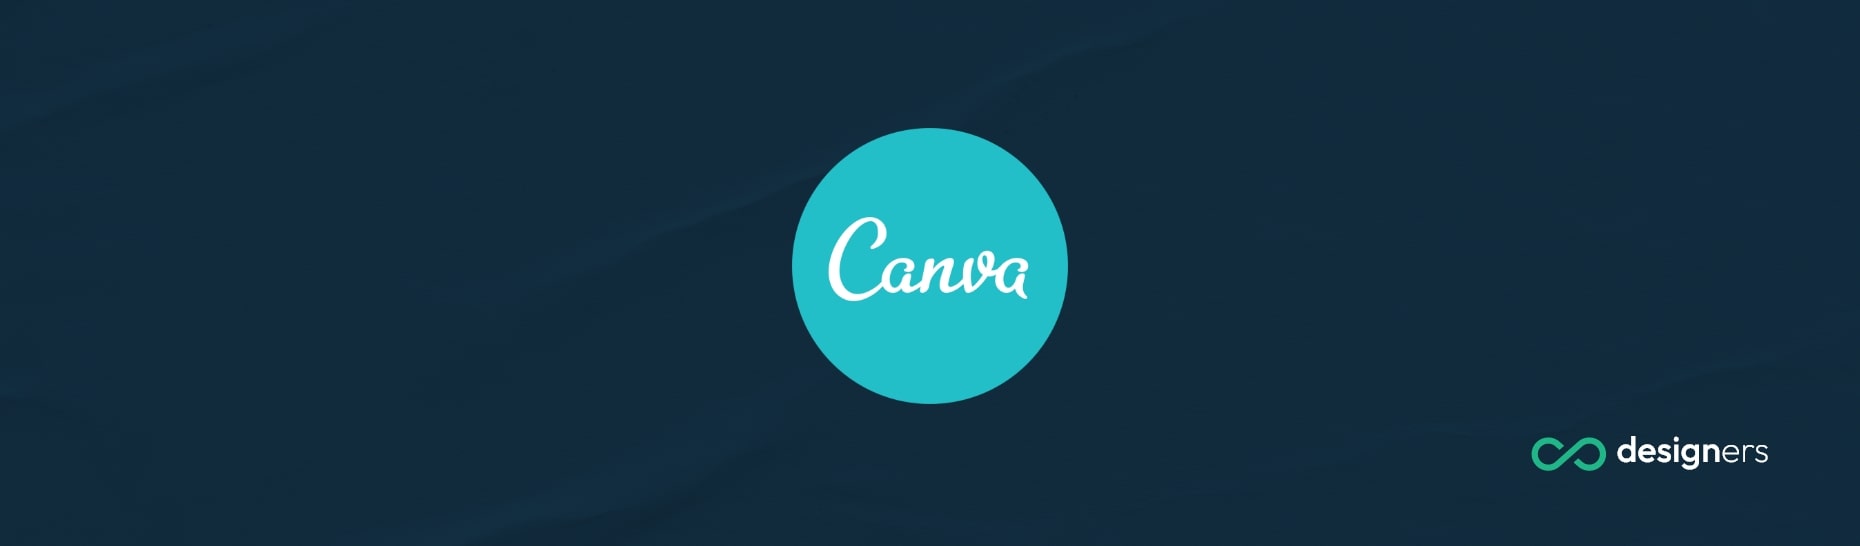 Can You Manipulate Shapes in Canva?